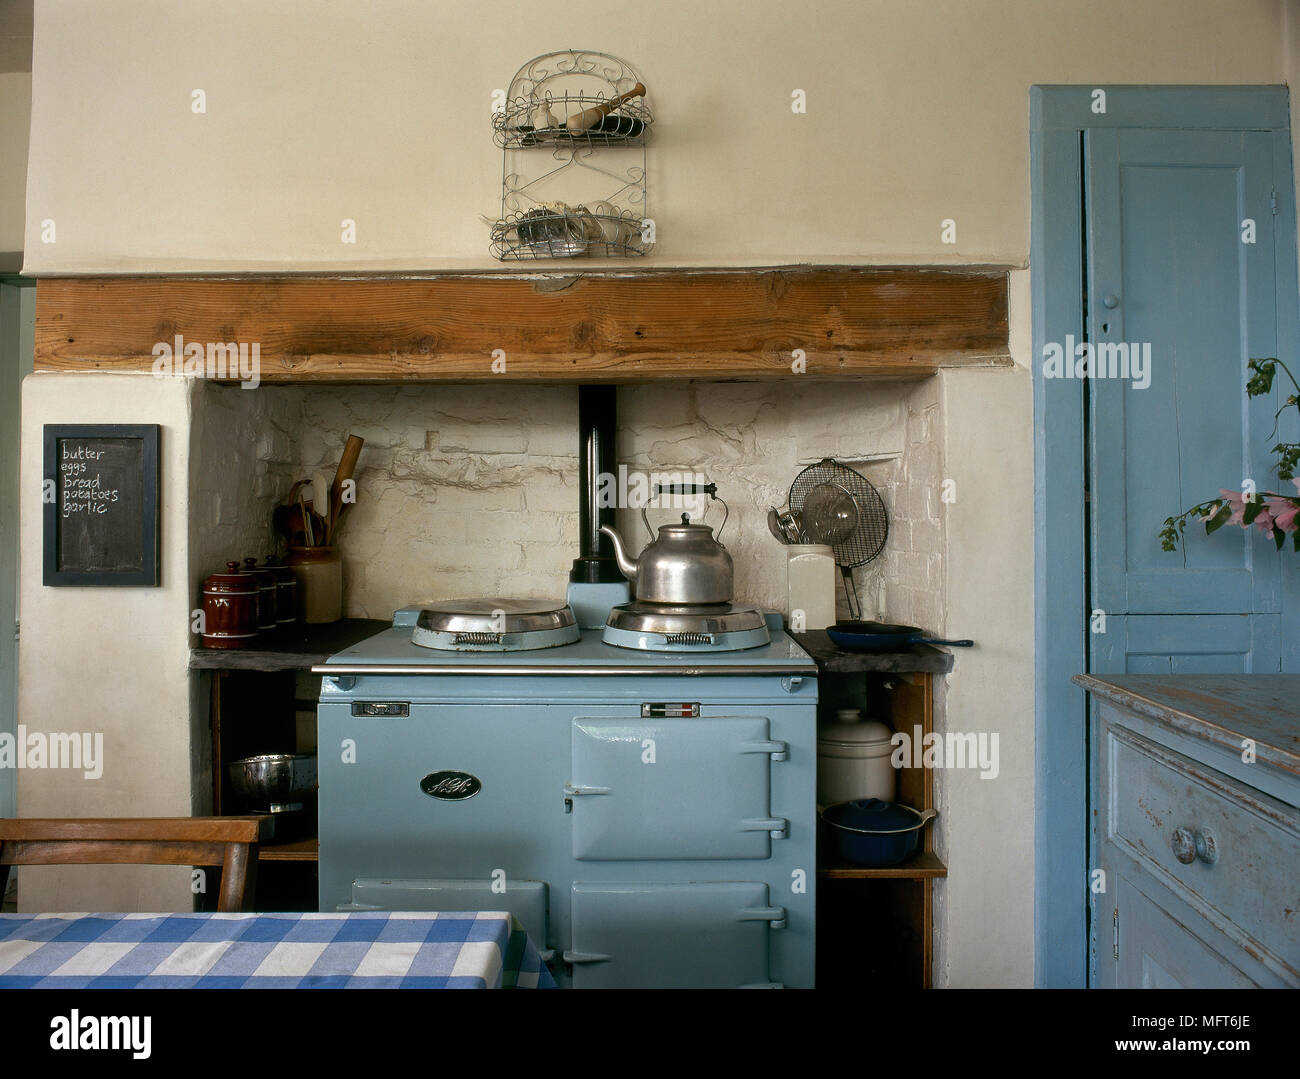 Country Kitchen With Distressed Cabinets And A Blue Oven In A Wall